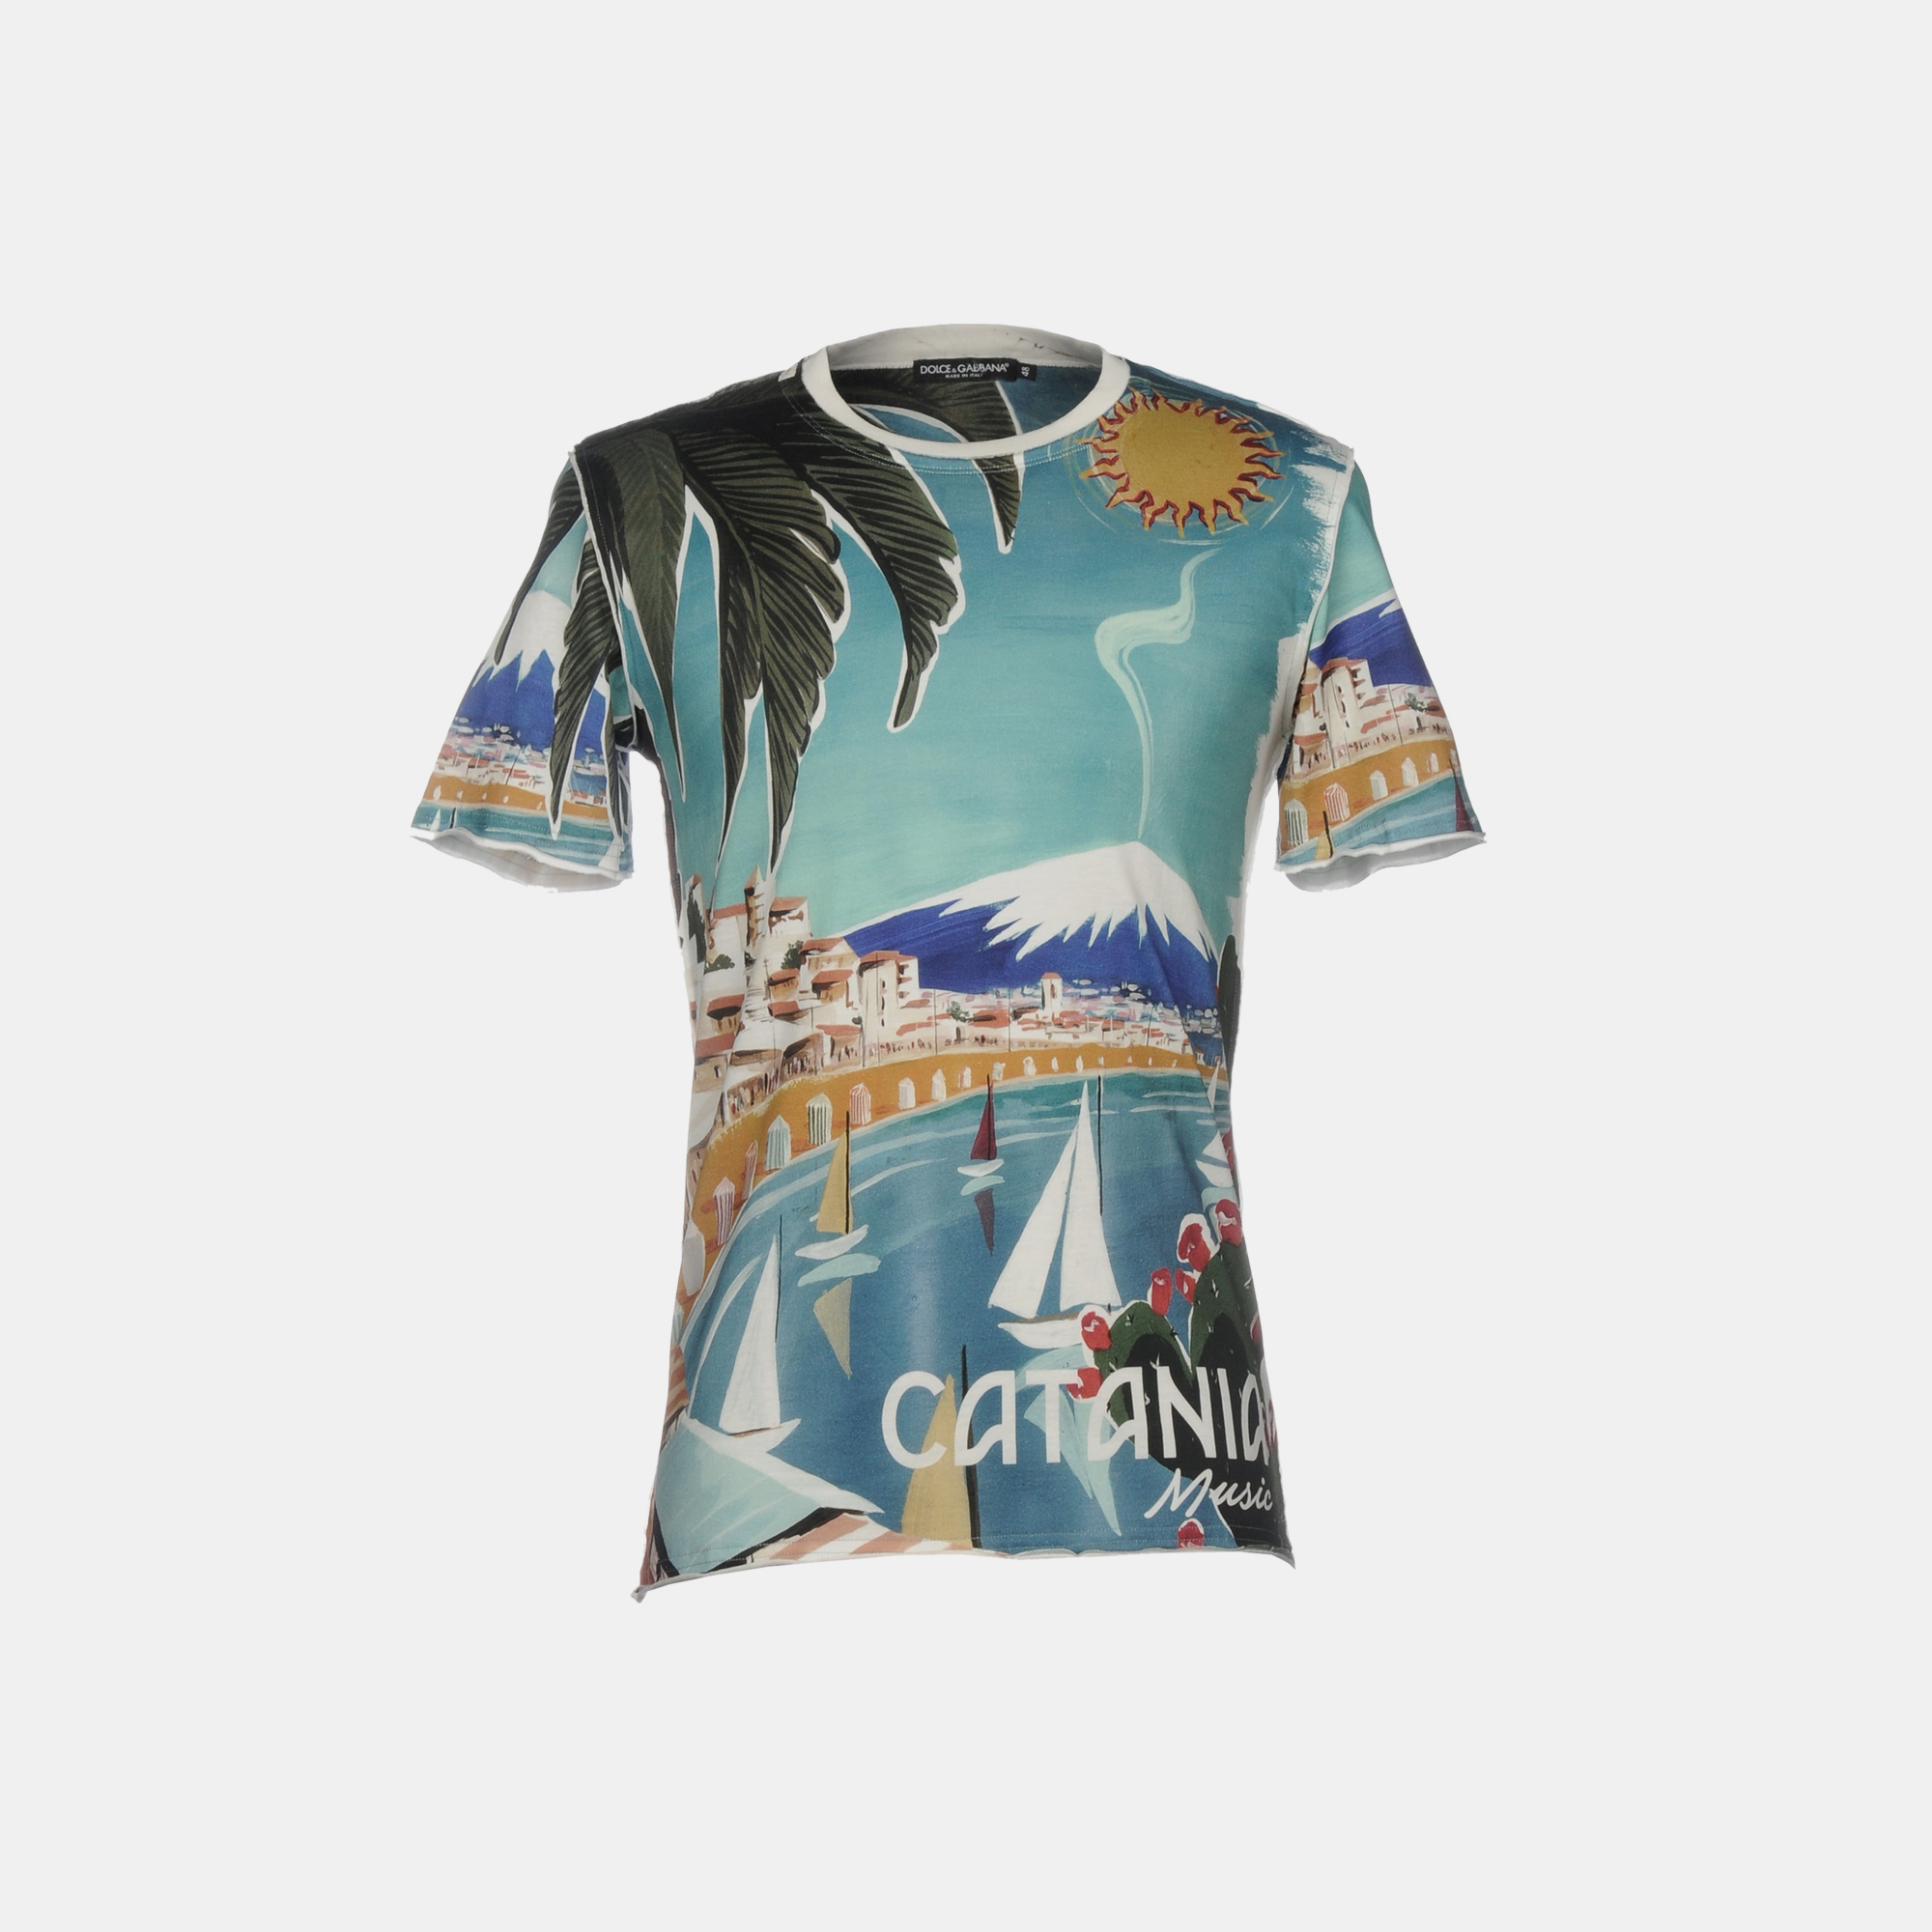 Pre-owned Dolce & Gabbana Teal Blue Catania Print Cotton T-shirt S (it 46)